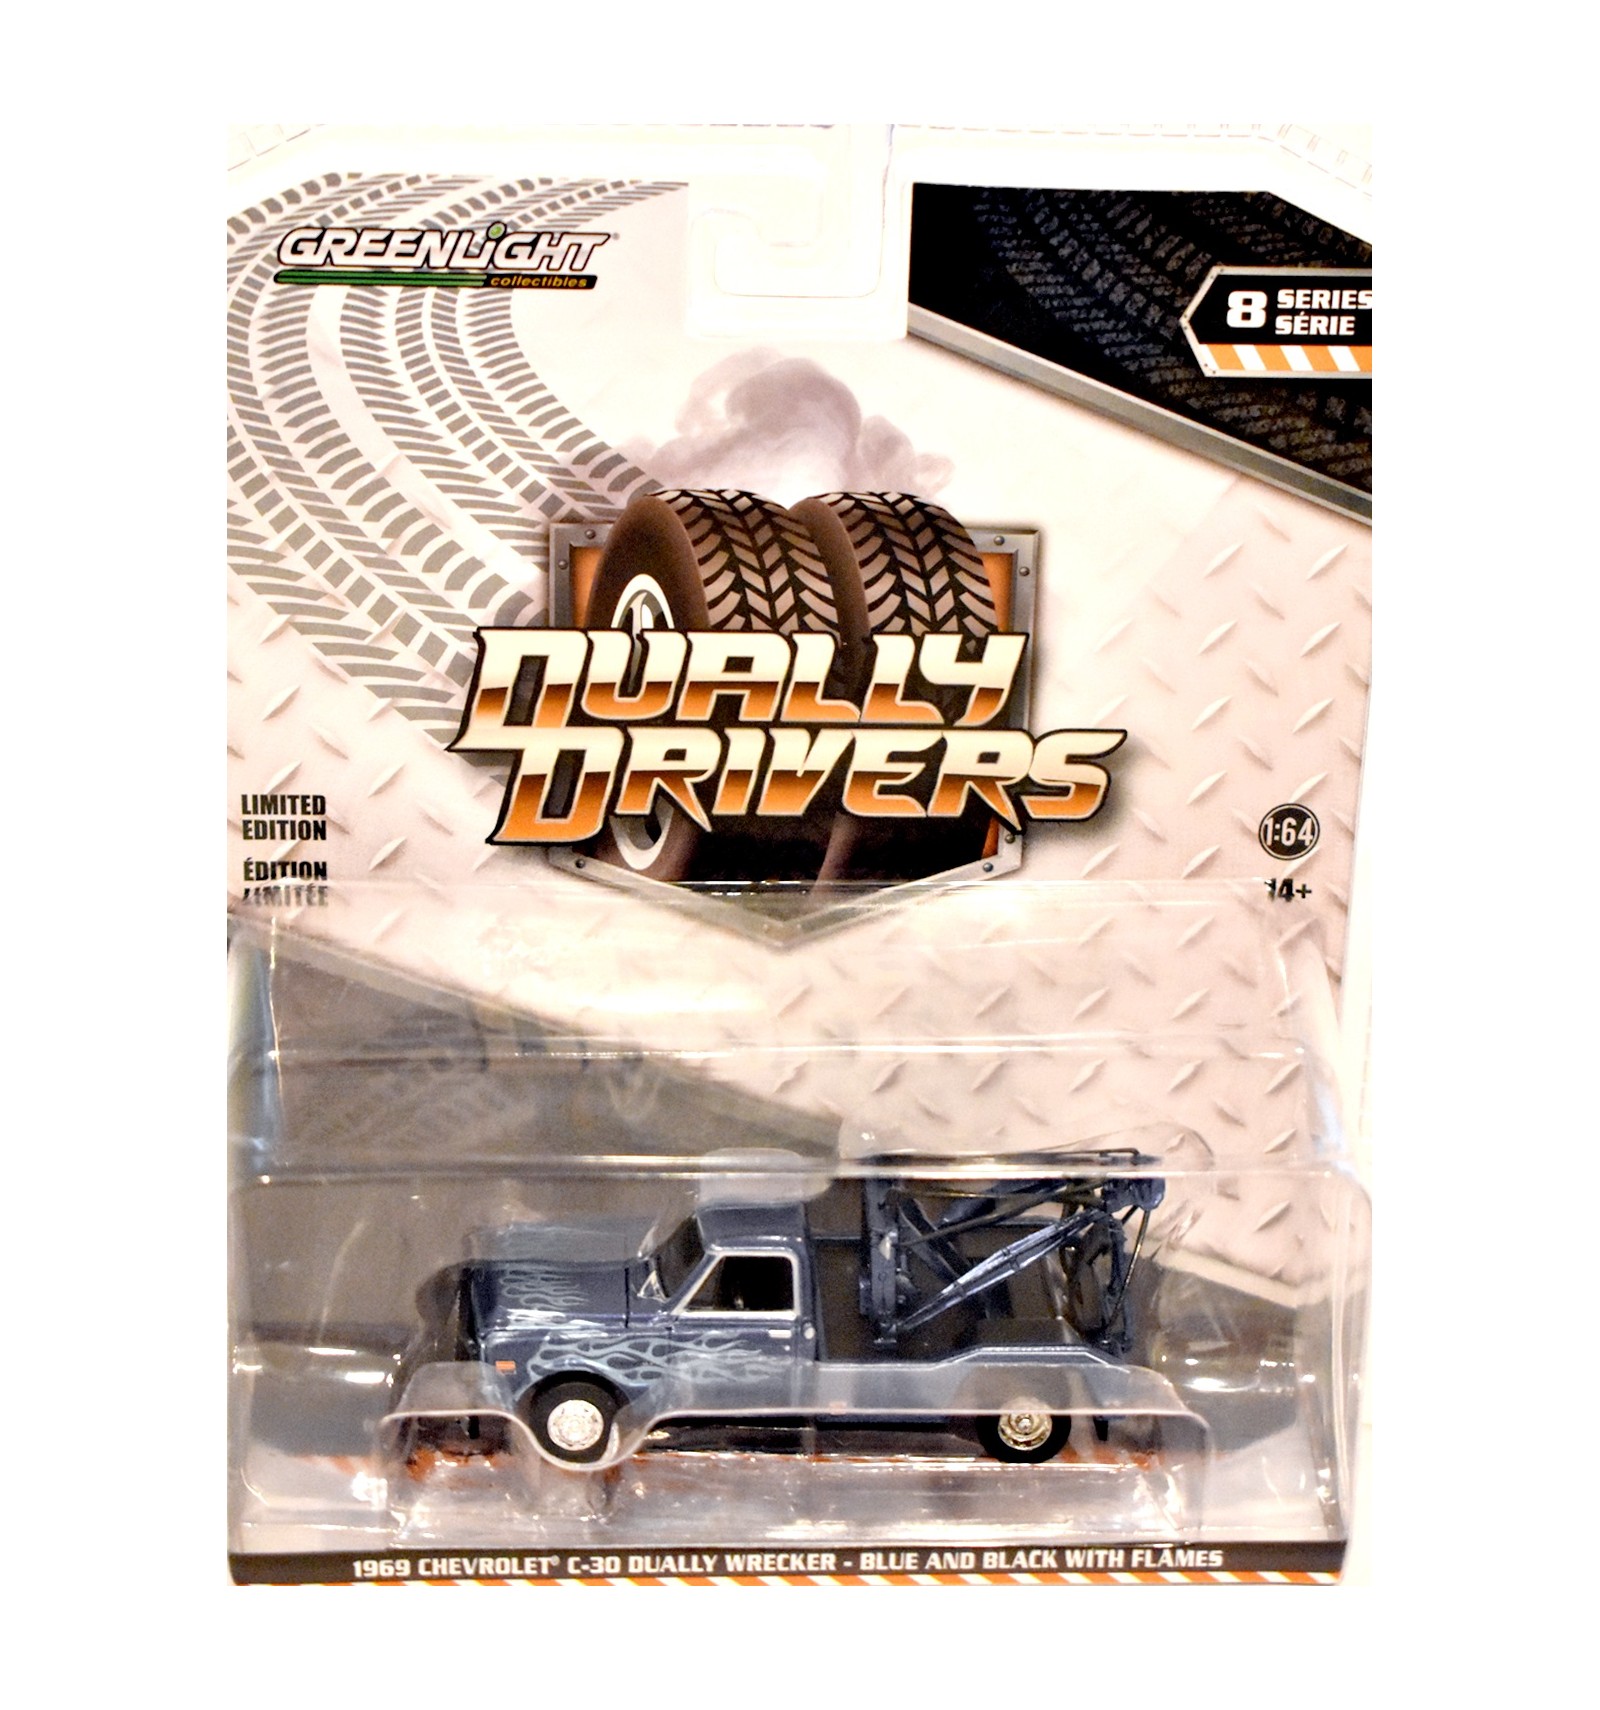 Greenlight Dually Drivers - 1969 Chevrolet C-30 Tow Truck - Global ...